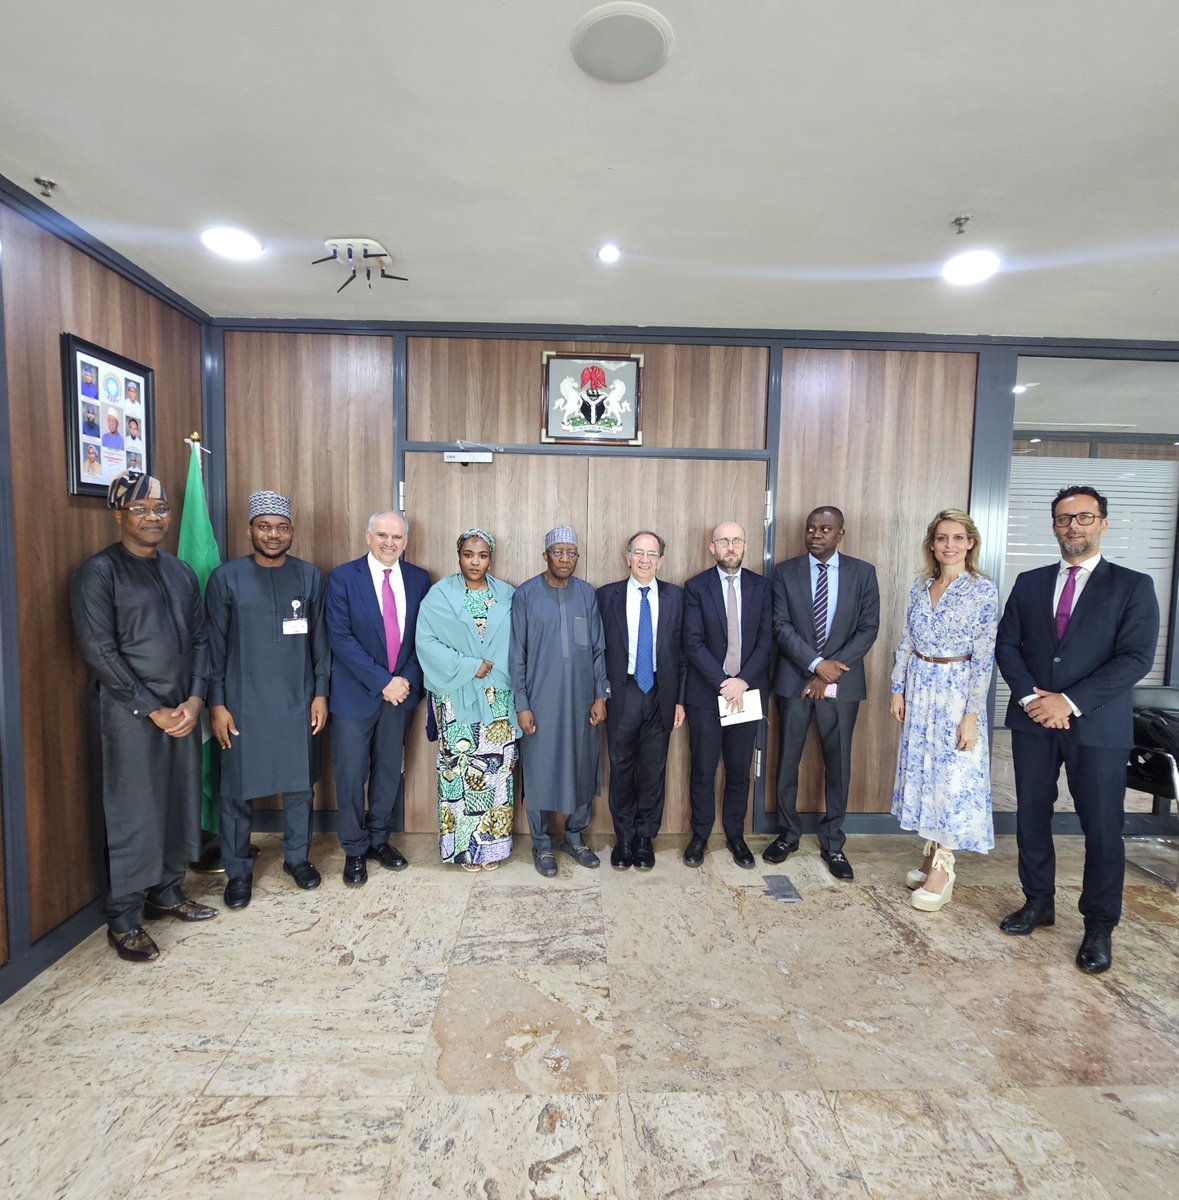 NERC Commissioners receive a team from a Spanish energy solution firm led by the Embassy of Spain in Nigeria on a courtesy visit to NERC today. #NERC #Electricity #NESI #Collaboration #SpanishEmbassy #Technology